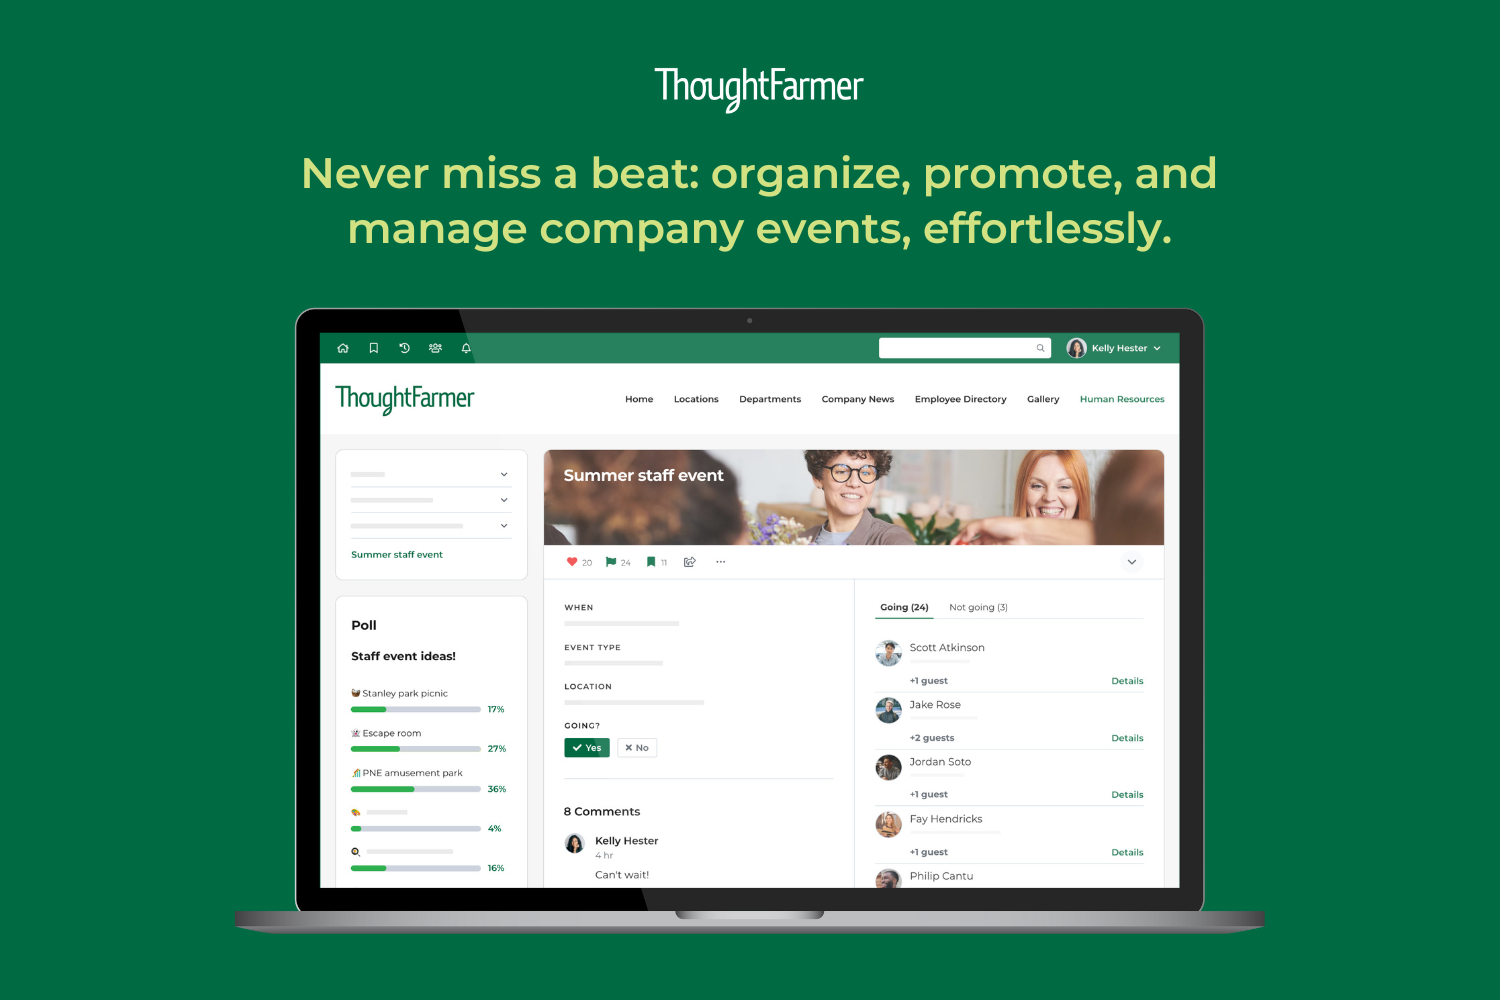 Organize, promote, and manage company events, effortlessly.